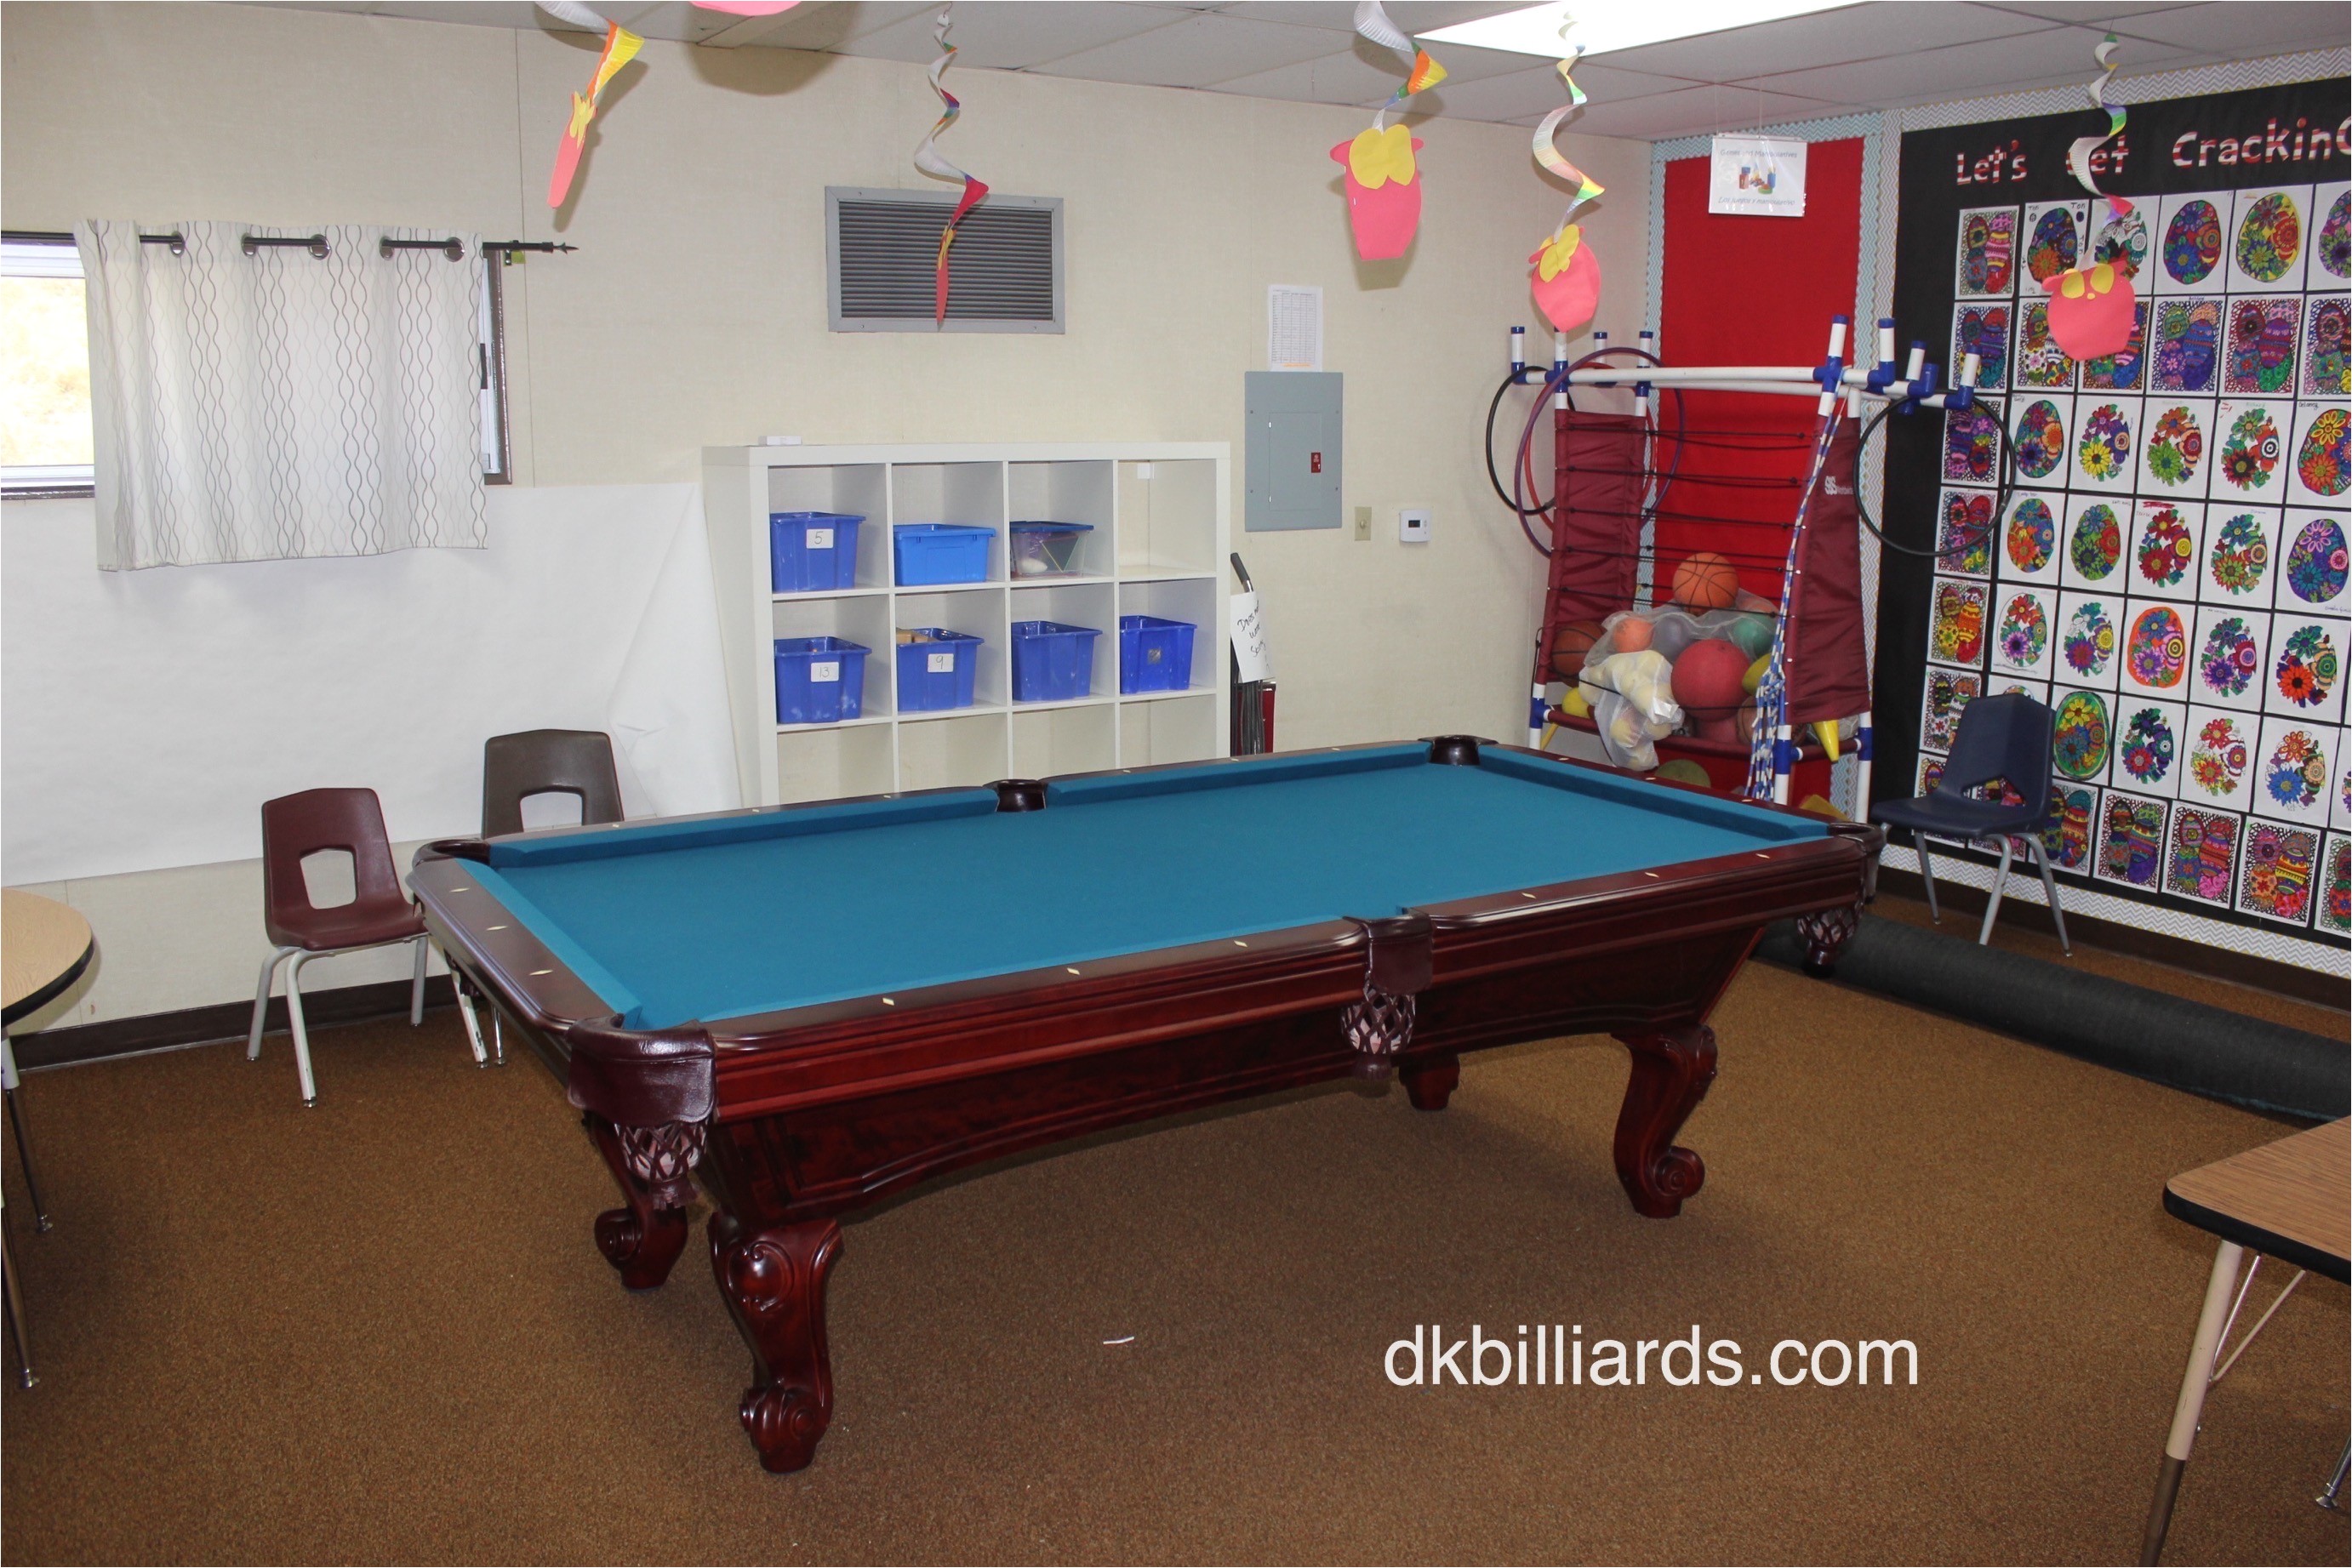 donating your pool table